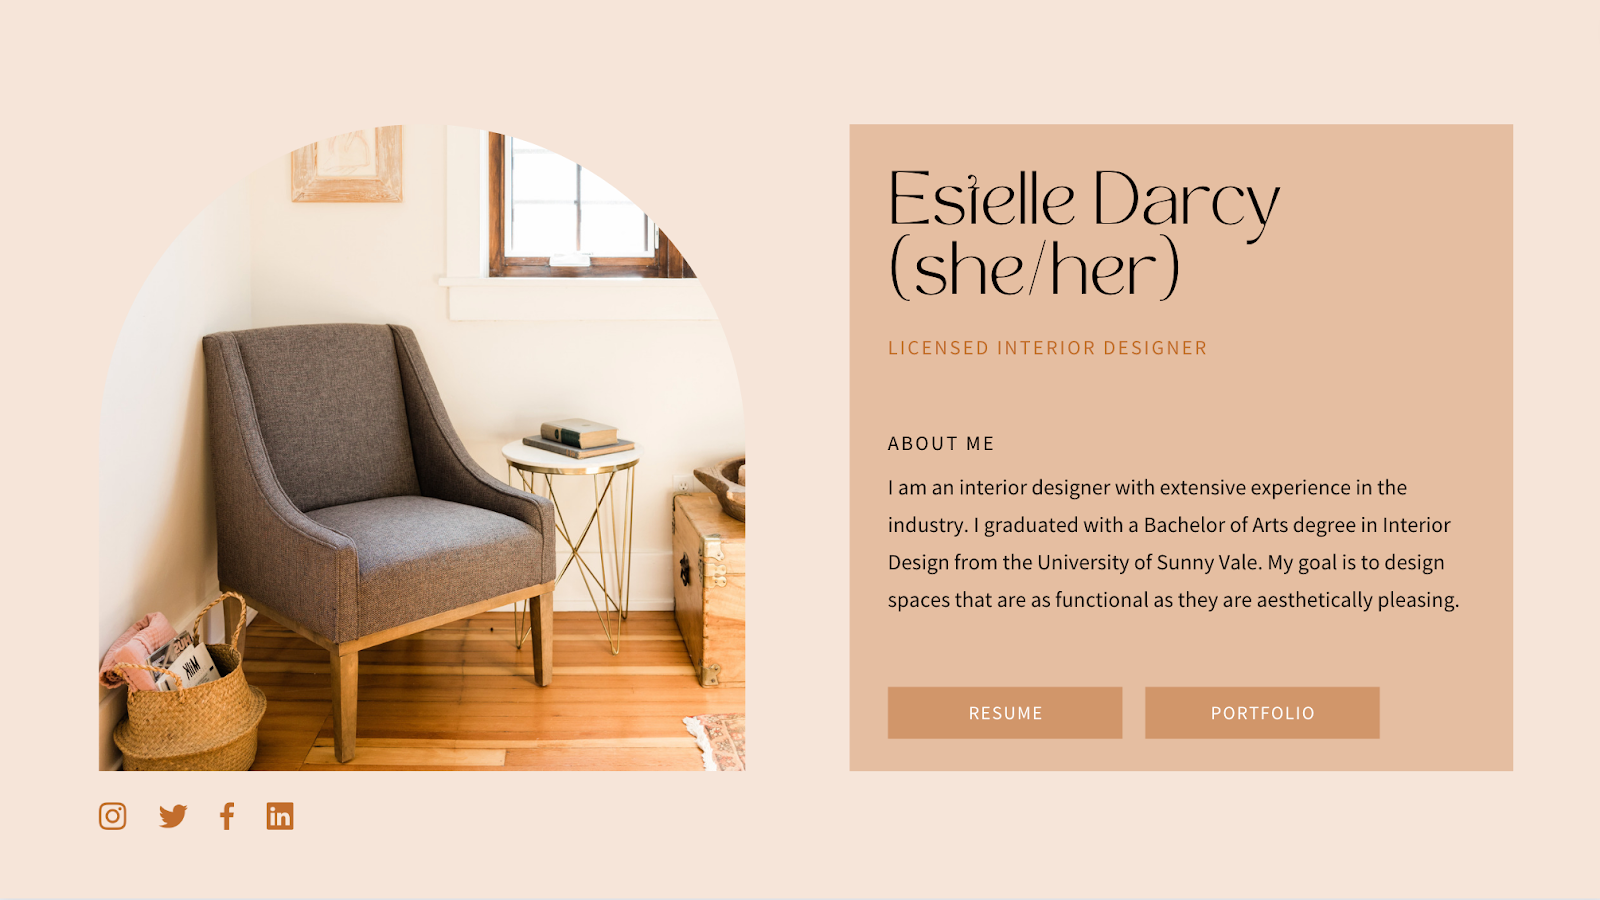 A beautiful Canva template featuring a sofa, coffee table with a book on it and wooden flooring in a well-lit apartment. The template is states "Estelle Darcy" with resume and portfolio buttons.